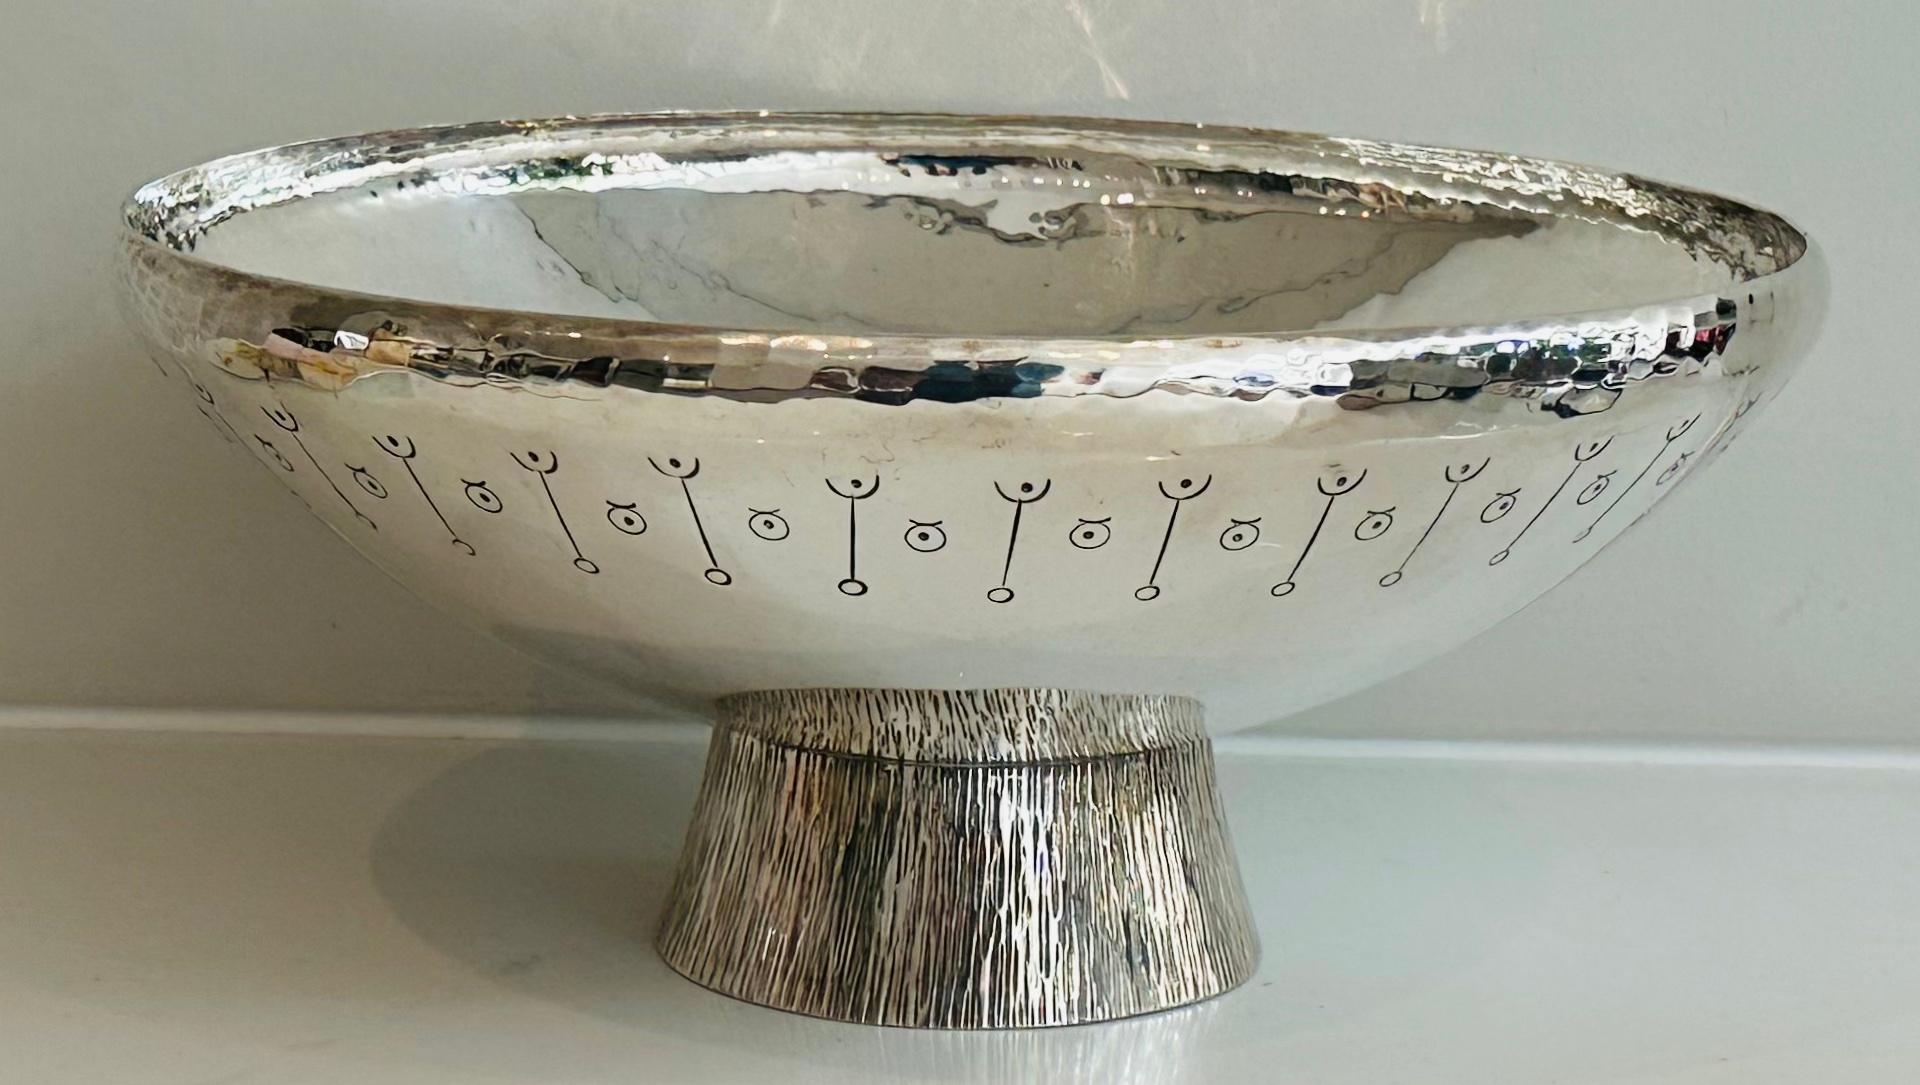 Late 20th Century 1980s English Silver Plated Decorative Hand-Hammered Serving or Display Bowl